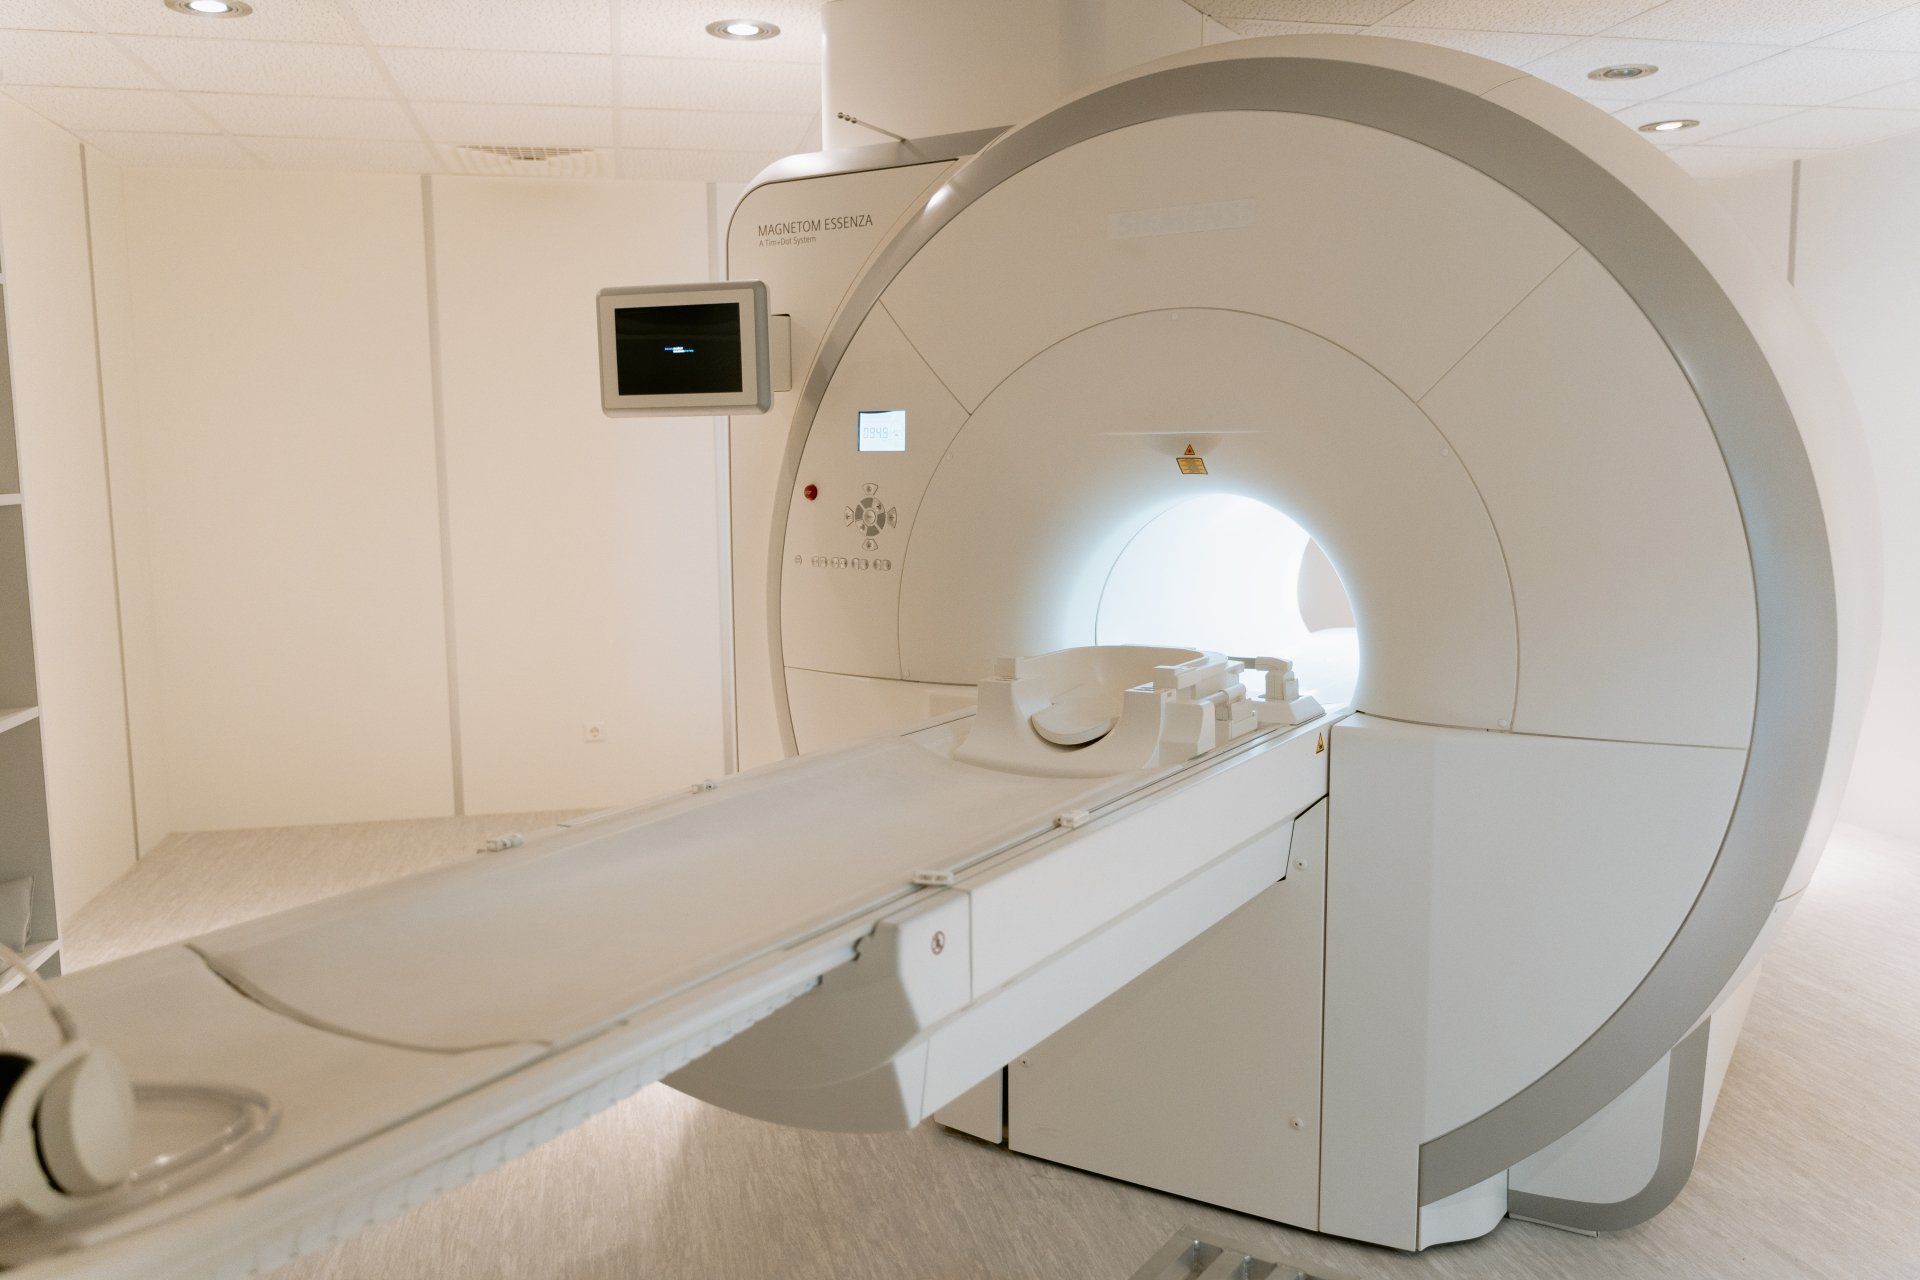 Why have an MRI scan?